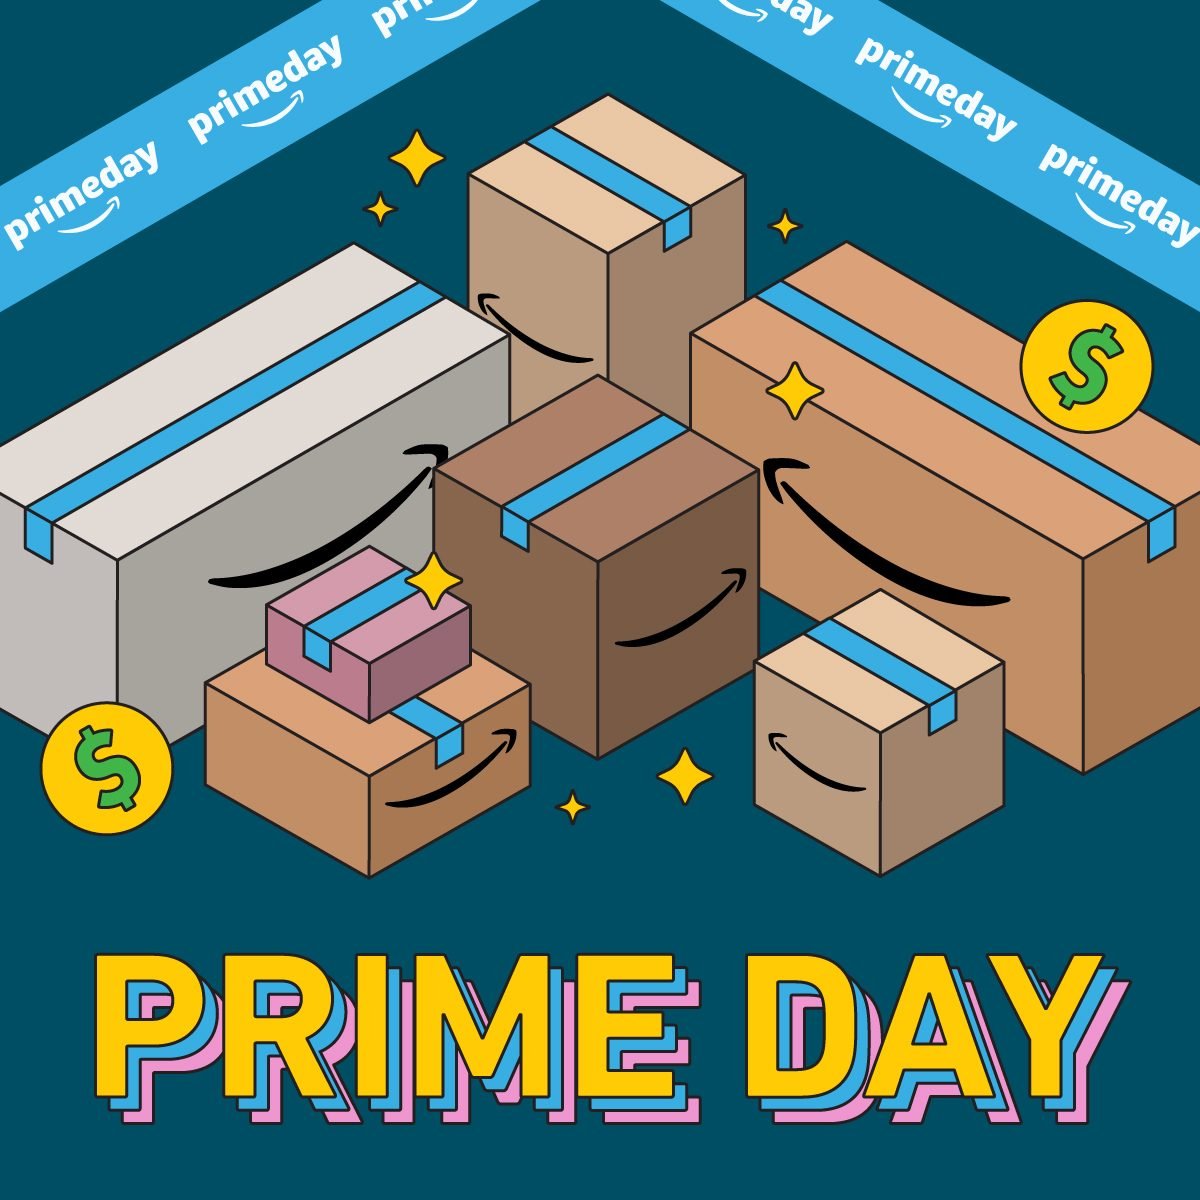 Prime Day Deals Megalist illustration of carton boxes with amazon blue tape with sparks and dollar sign elements in yellow